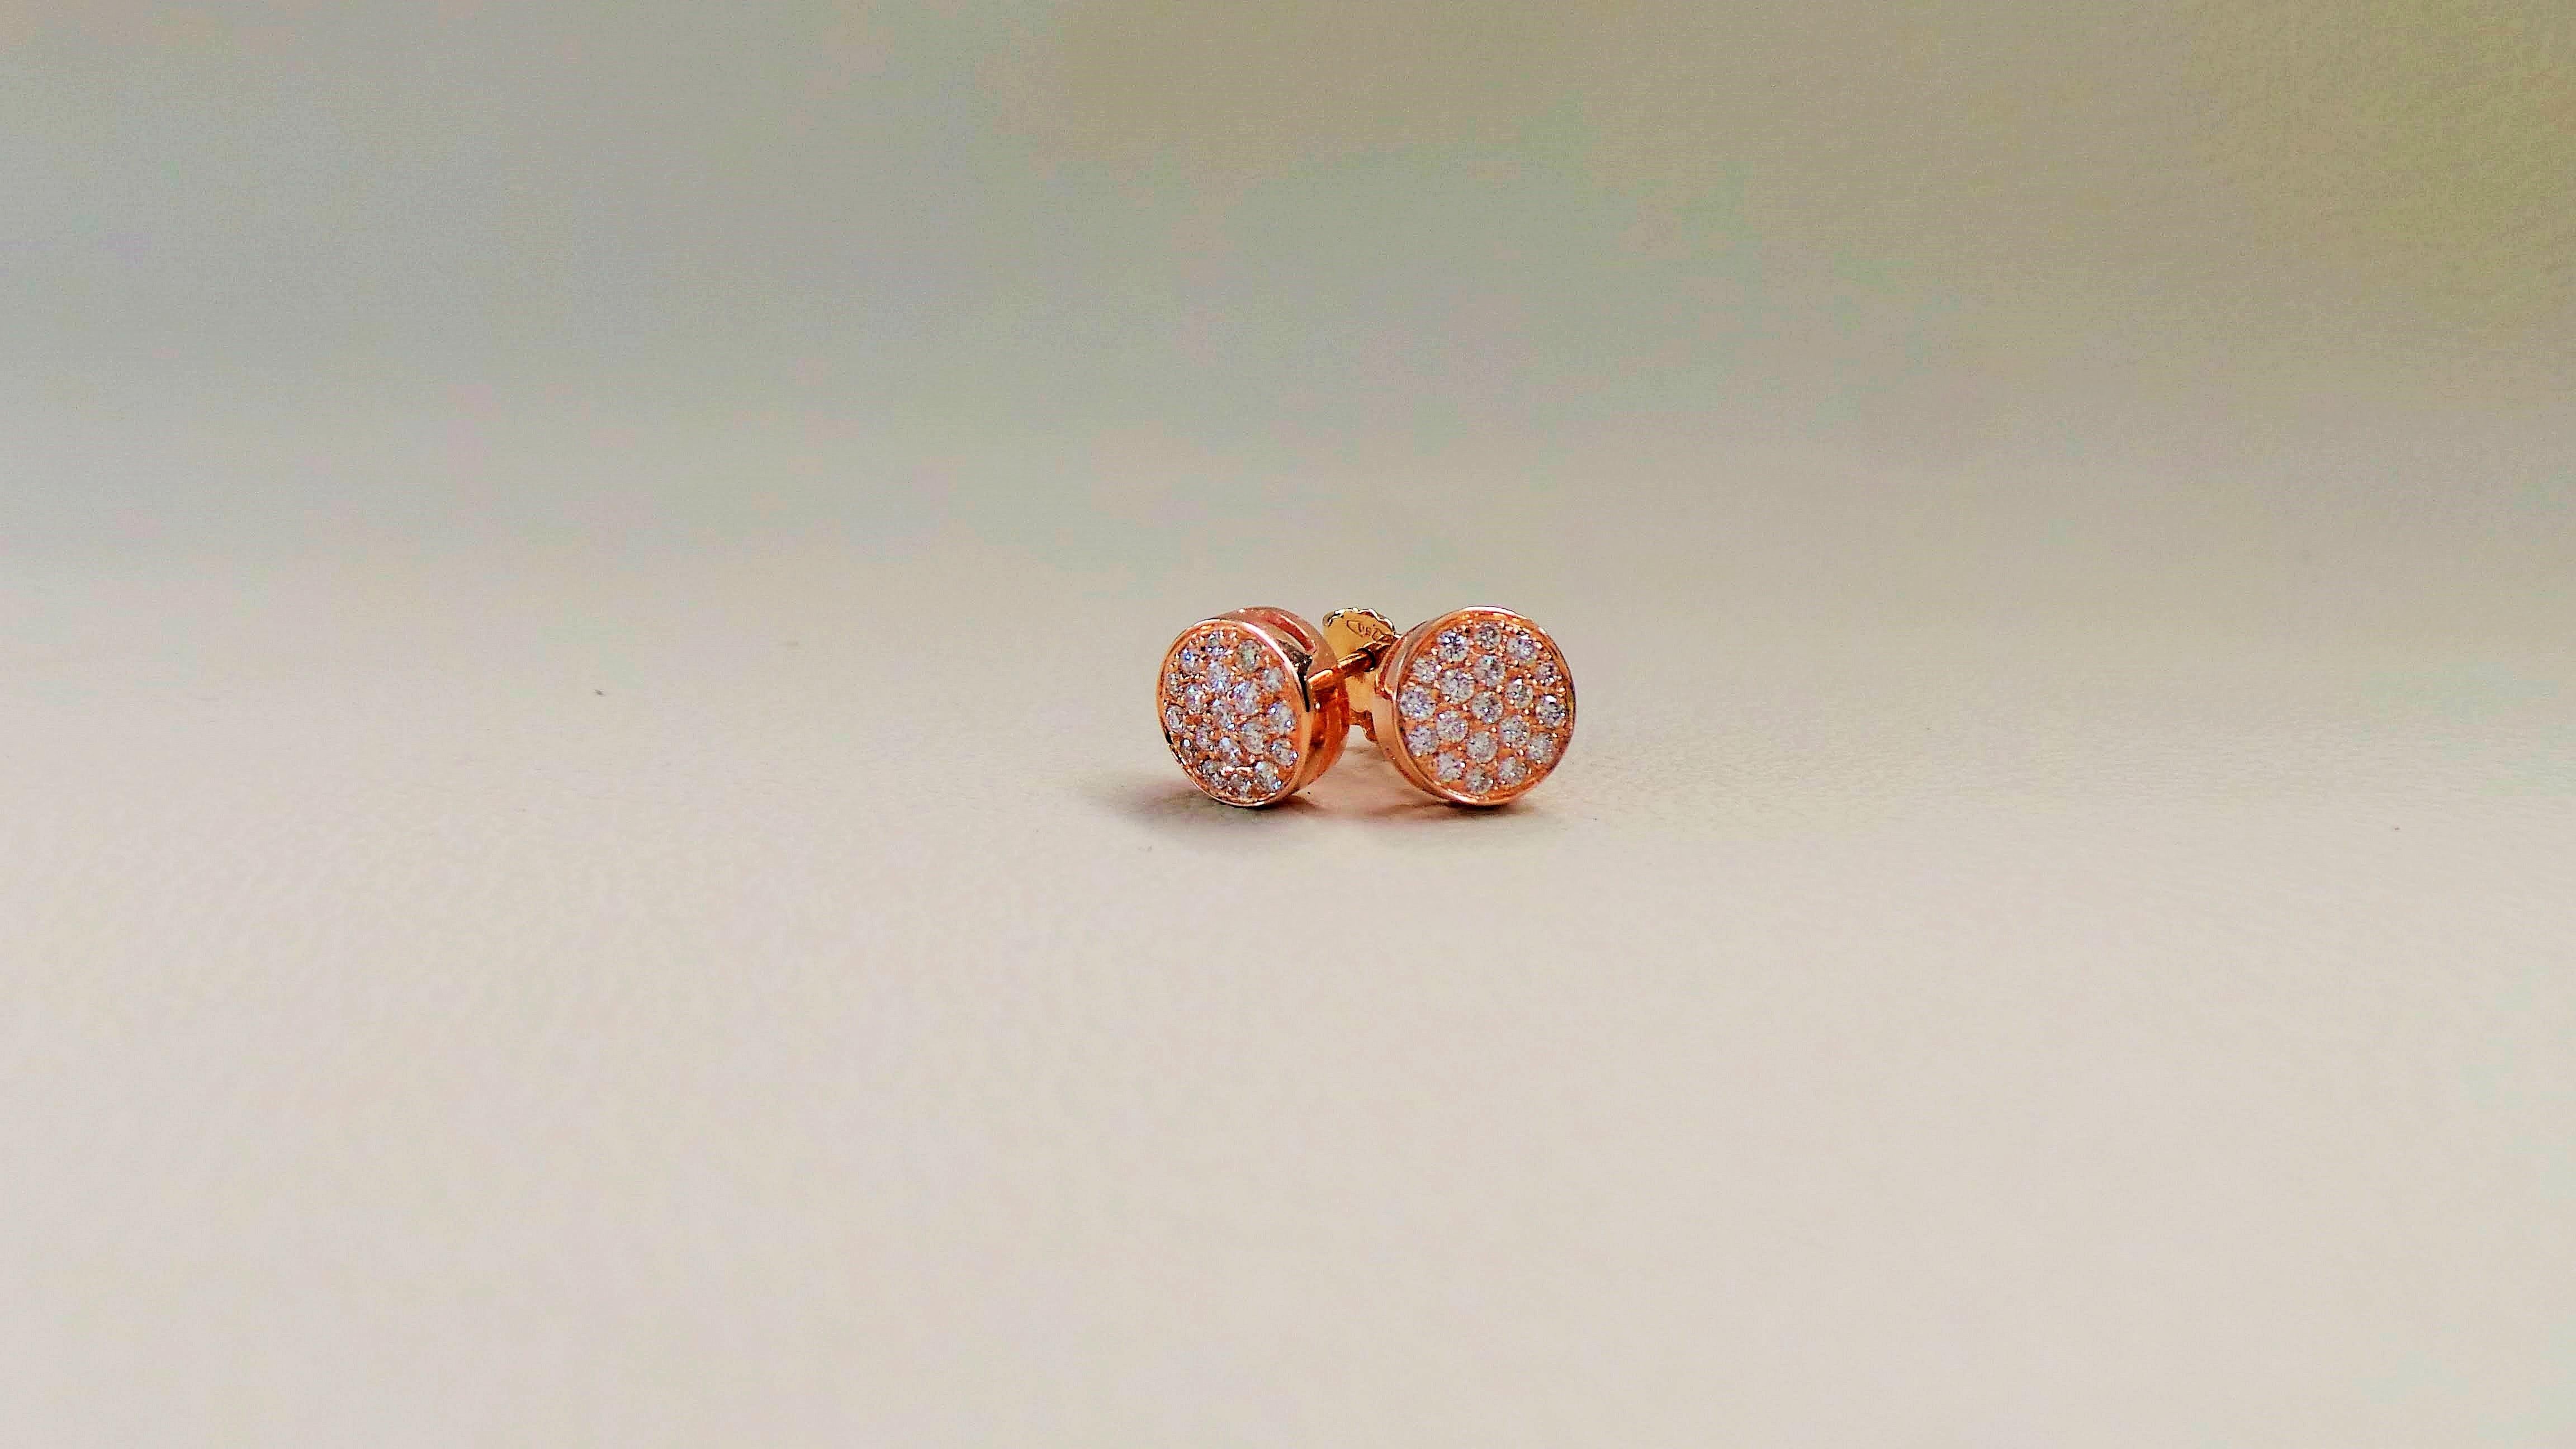 Andrea Macinai design a dedicated collection of linear earrings with diamonds Pavé-Set .
Feminine and delicate, the designs in the round earring collection offer a refined sense of grace that speaks of quiet confidence. These elegant rose gold